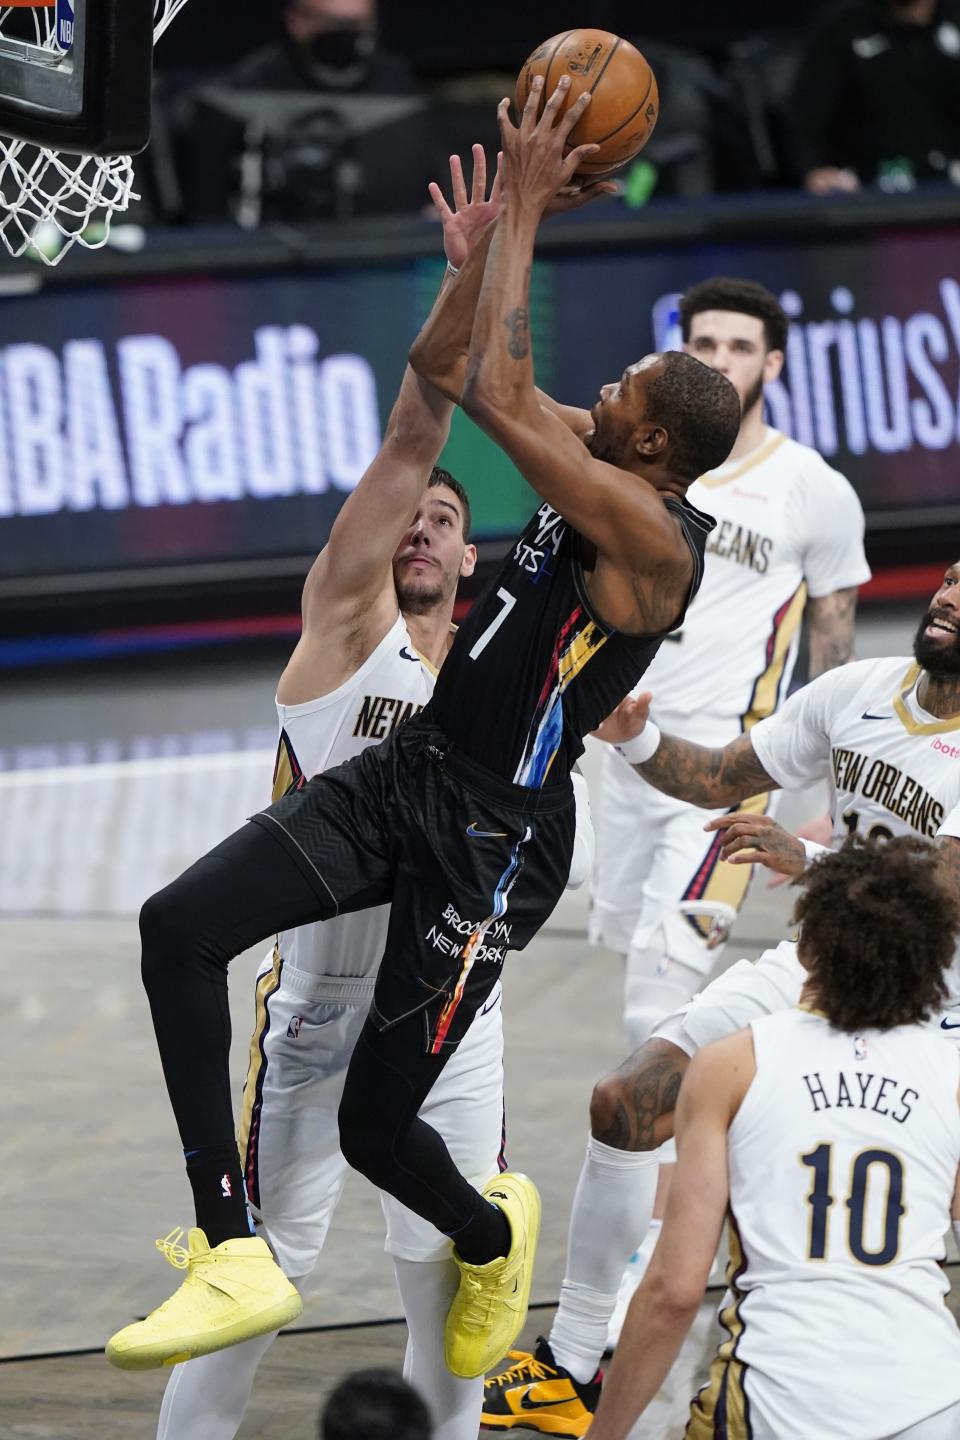 Brooklyn Nets' Kevin Durant (7) shoots over New Orleans Pelicans' Willy Hernangomez during the first half of an NBA basketball game Wednesday, April 7, 2021, in New York. (AP Photo/Frank Franklin II)